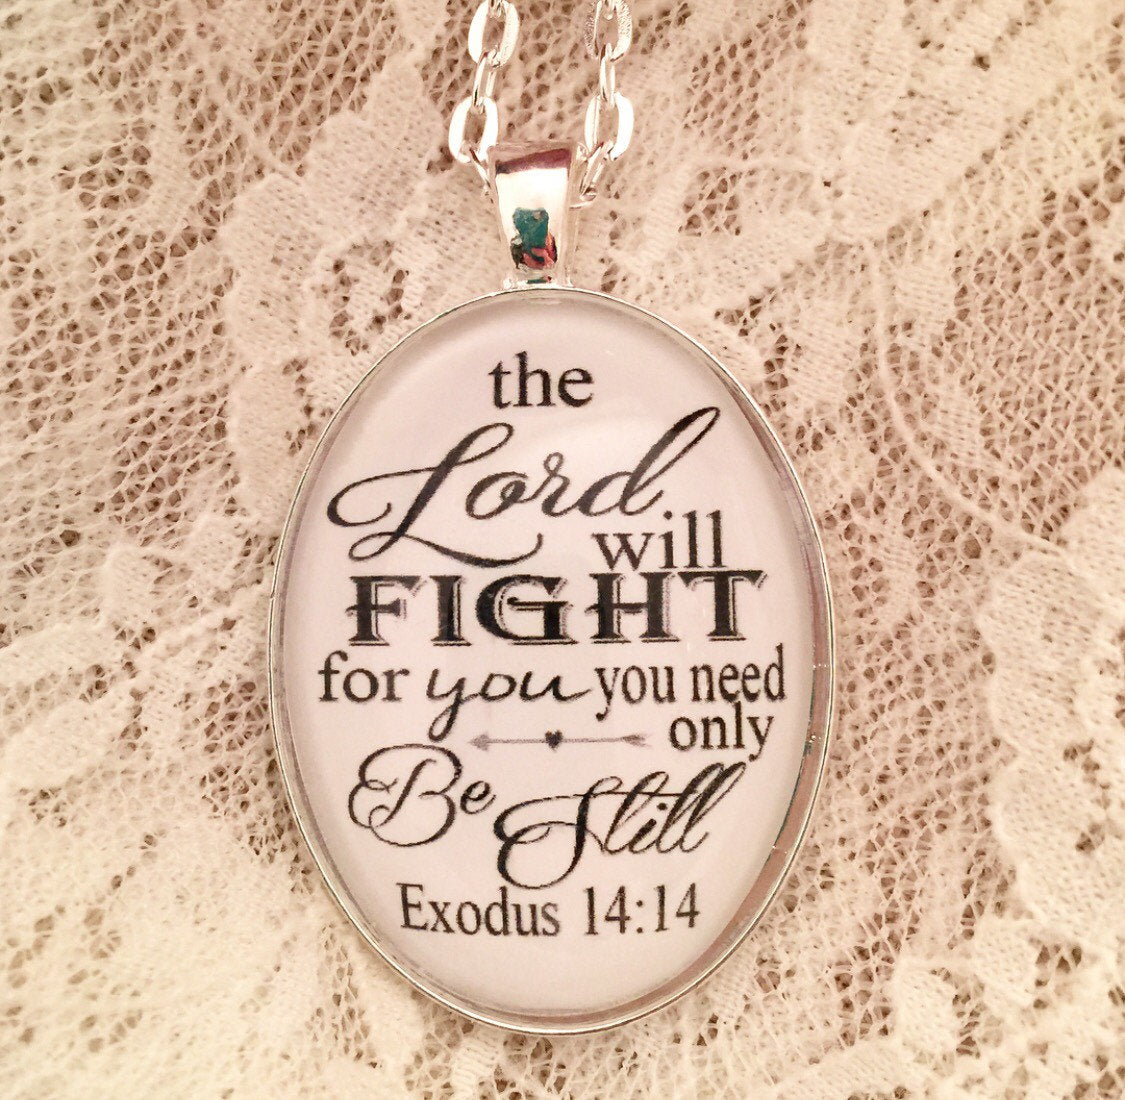 The Lord will fight for you you need only be still. Exodus 14:14 Nceklace - Redeemed Jewelry